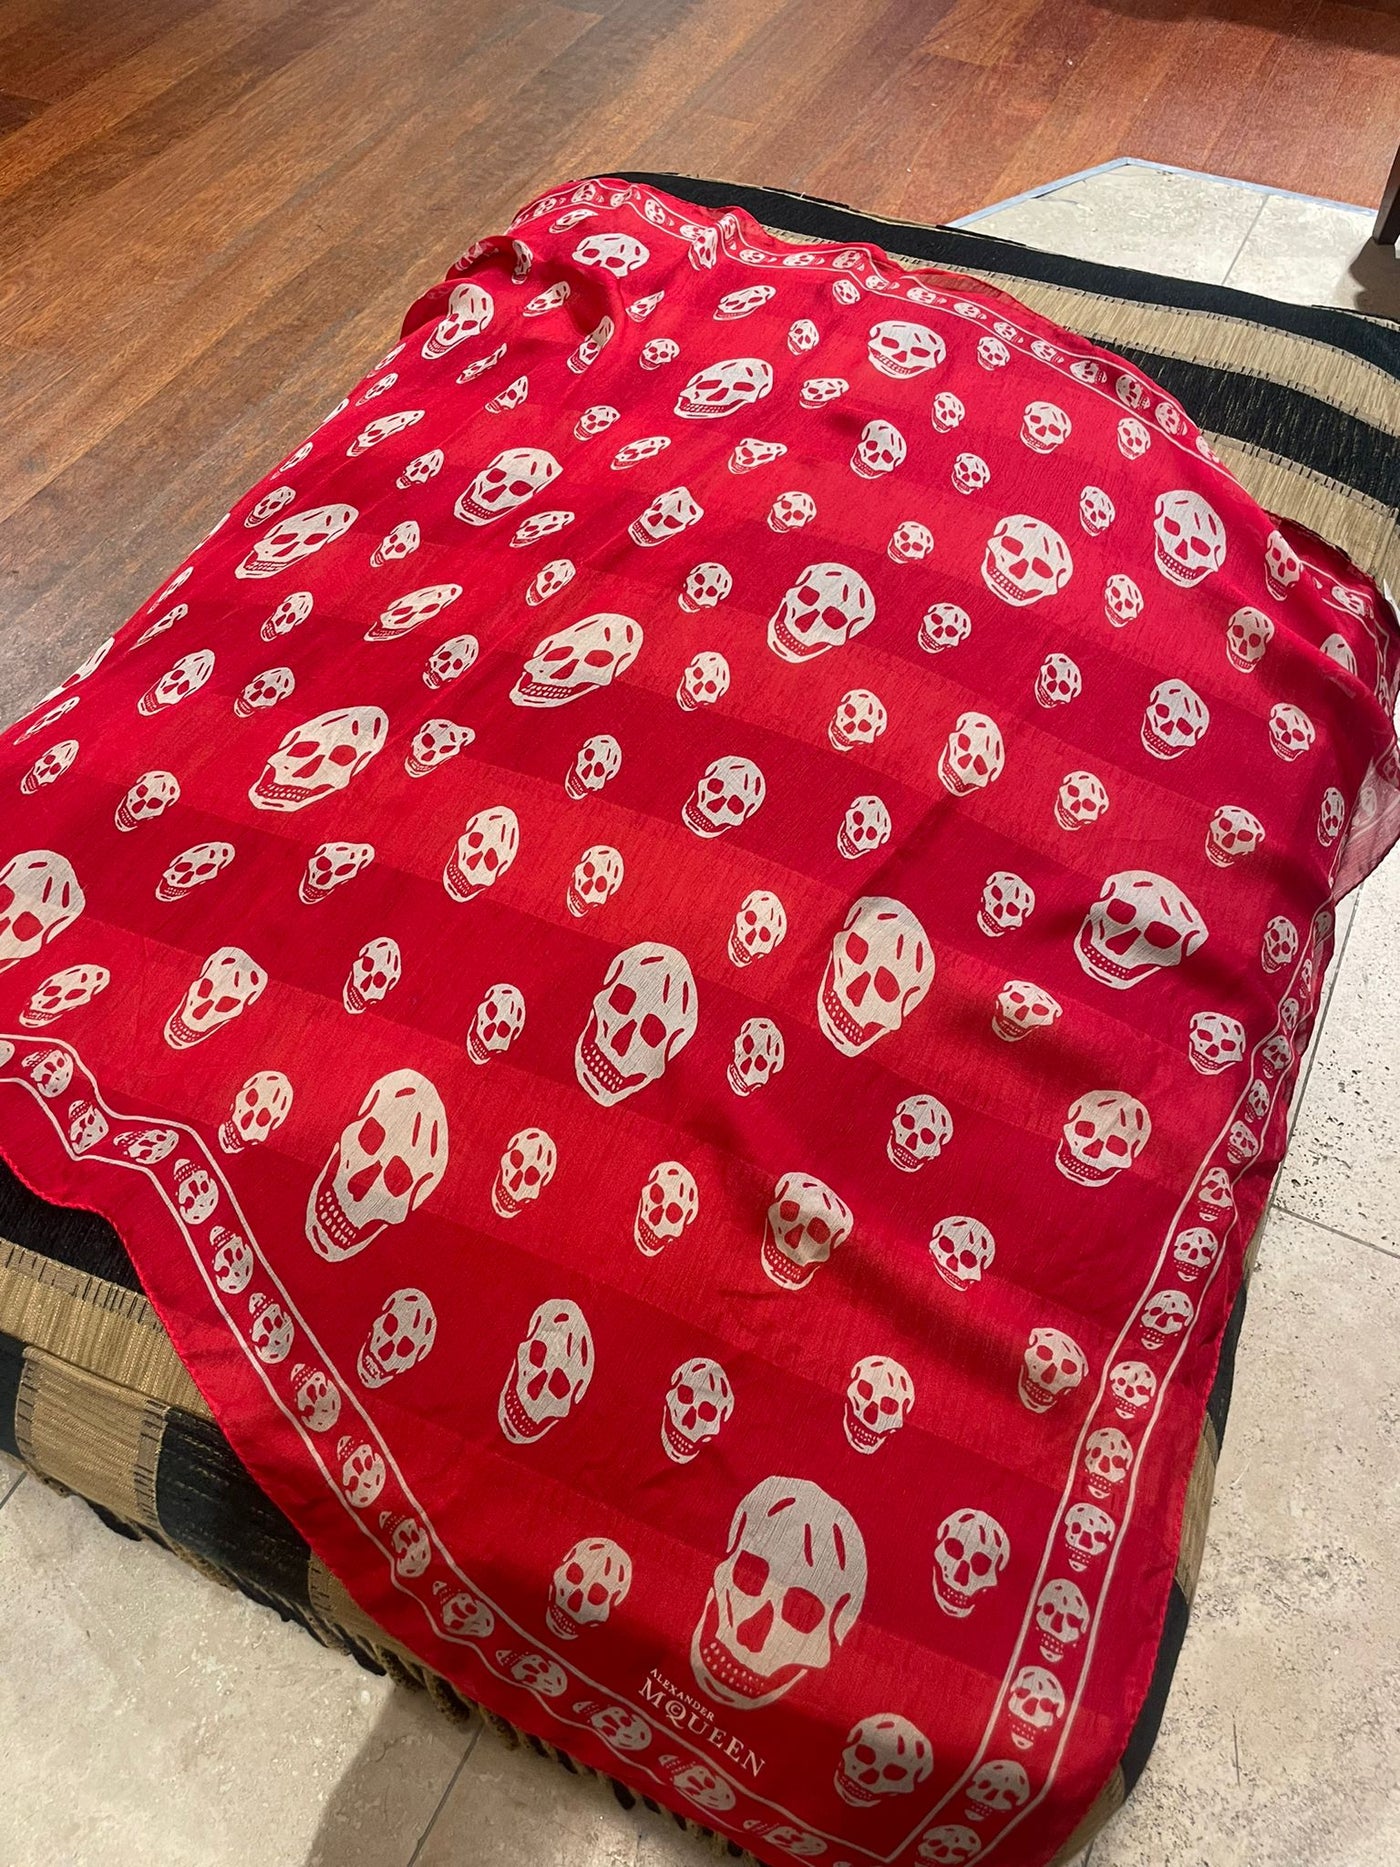 Alexander McQueen red and white skull silk scarf